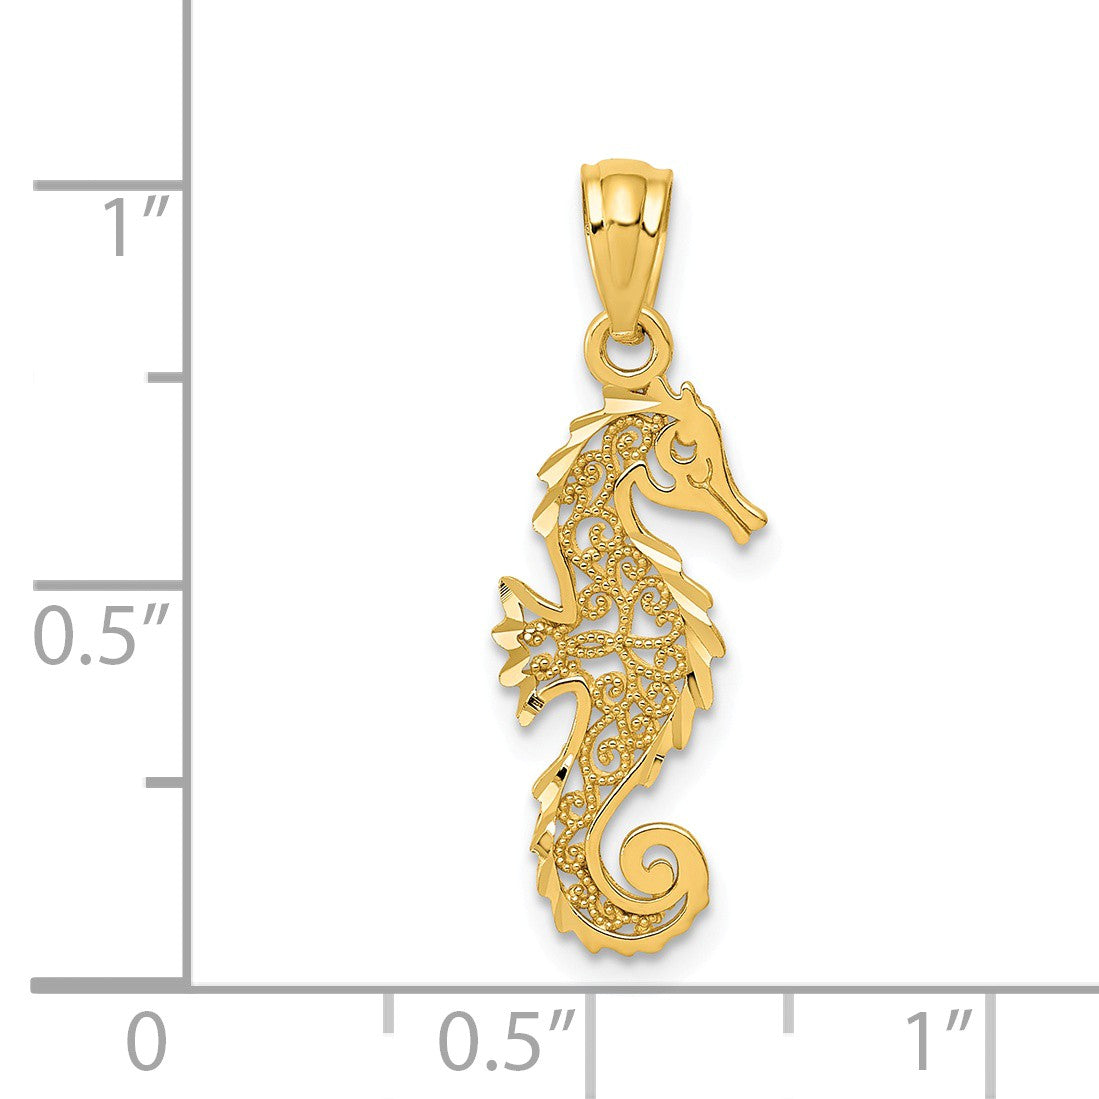 Alternate view of the 14k Yellow Gold Small Filigree Seahorse Pendant, 8 x 24mm by The Black Bow Jewelry Co.